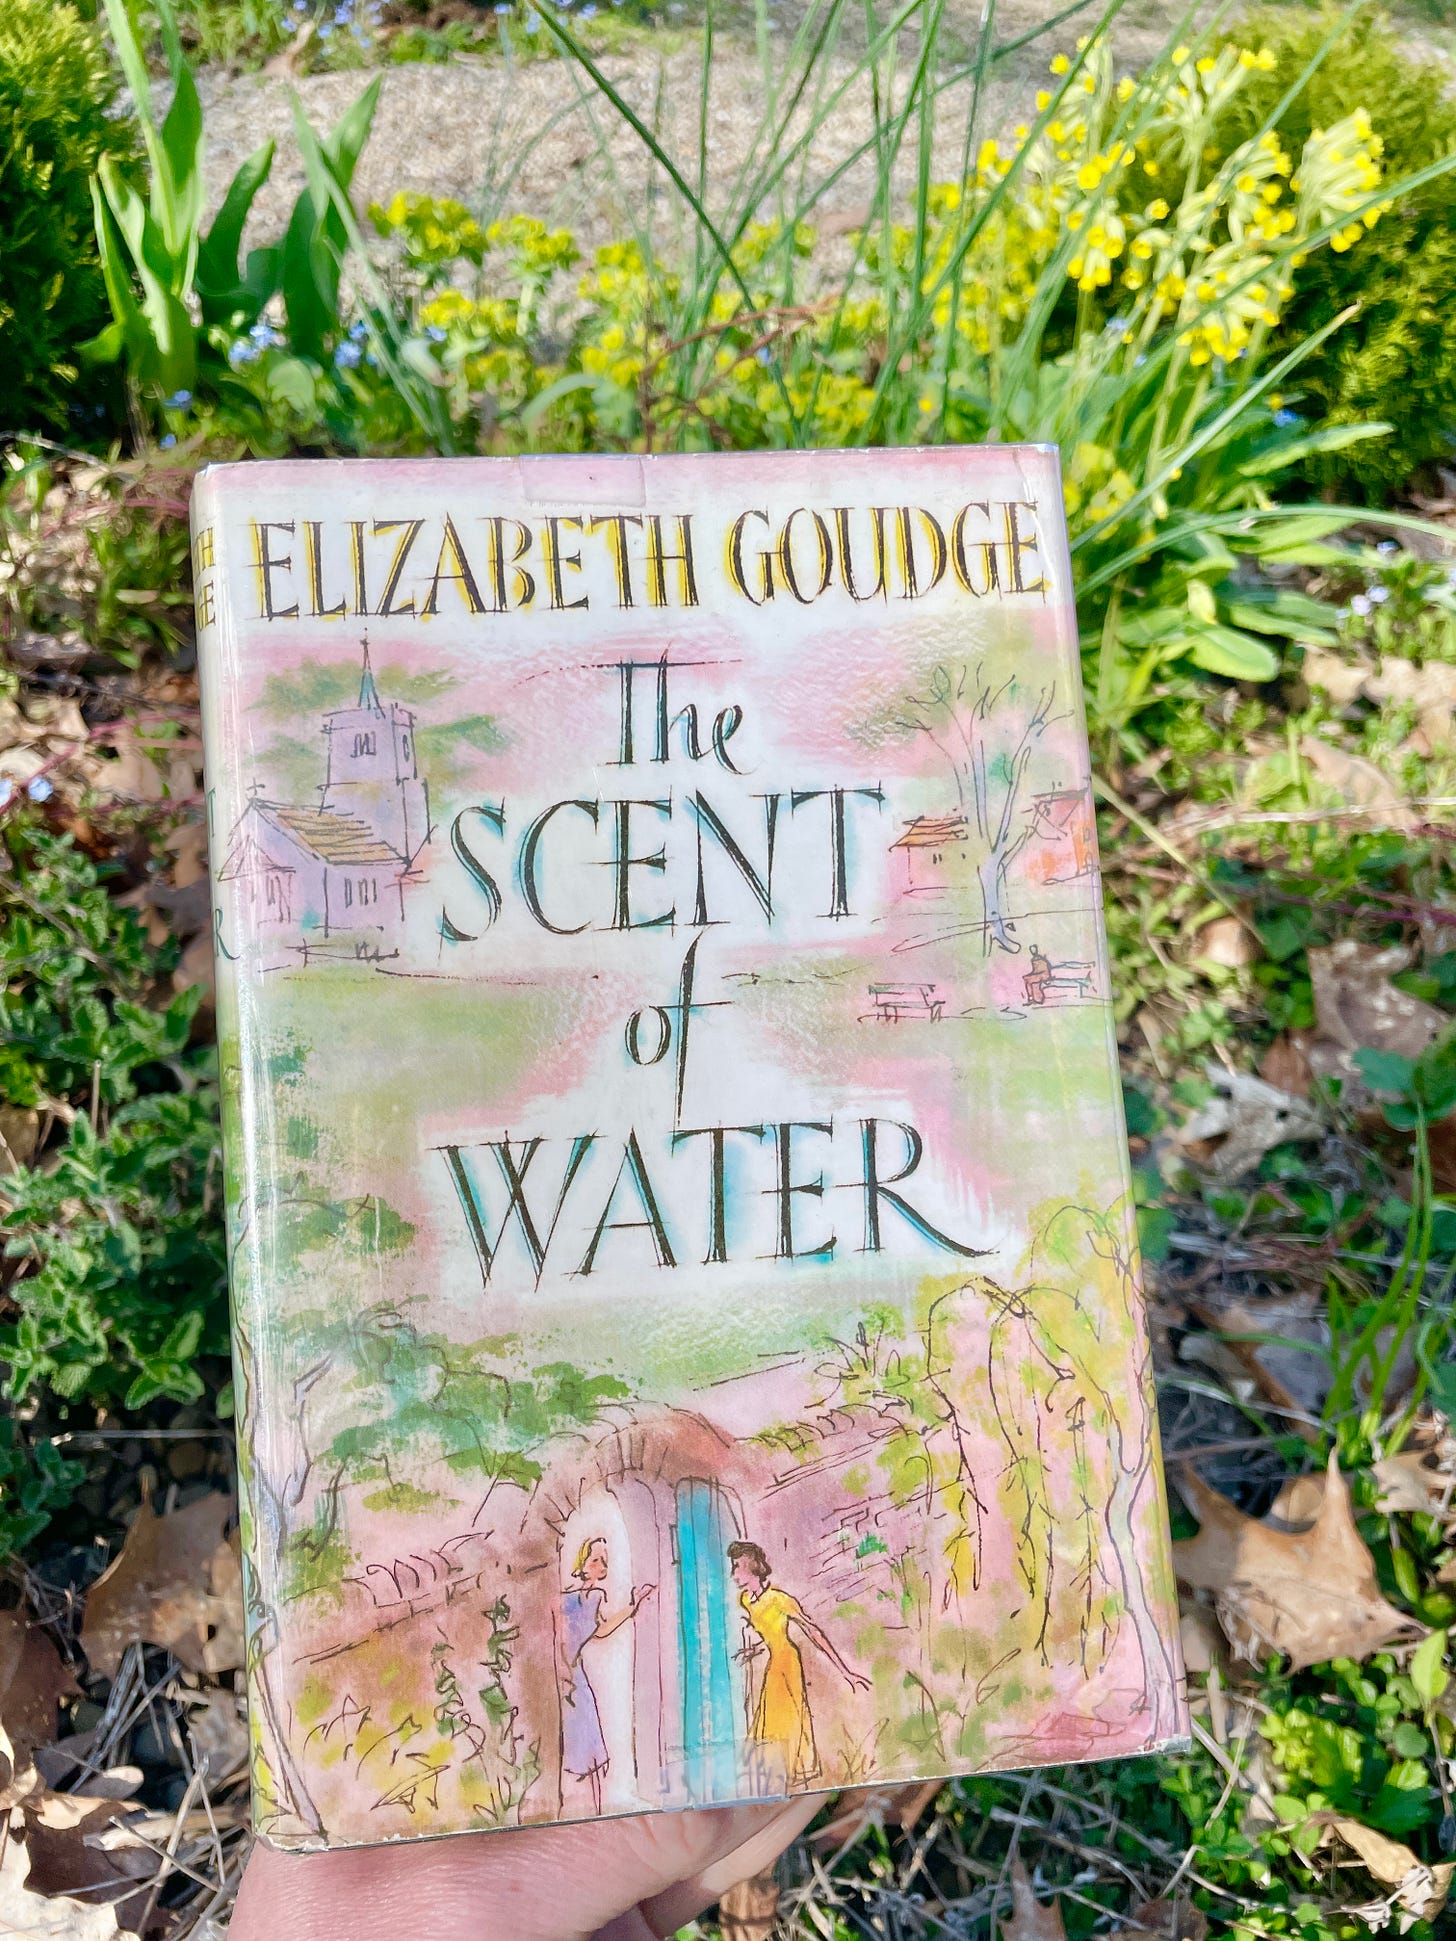 The Scent of Water by Elizabeth Goudge, our readalong for May